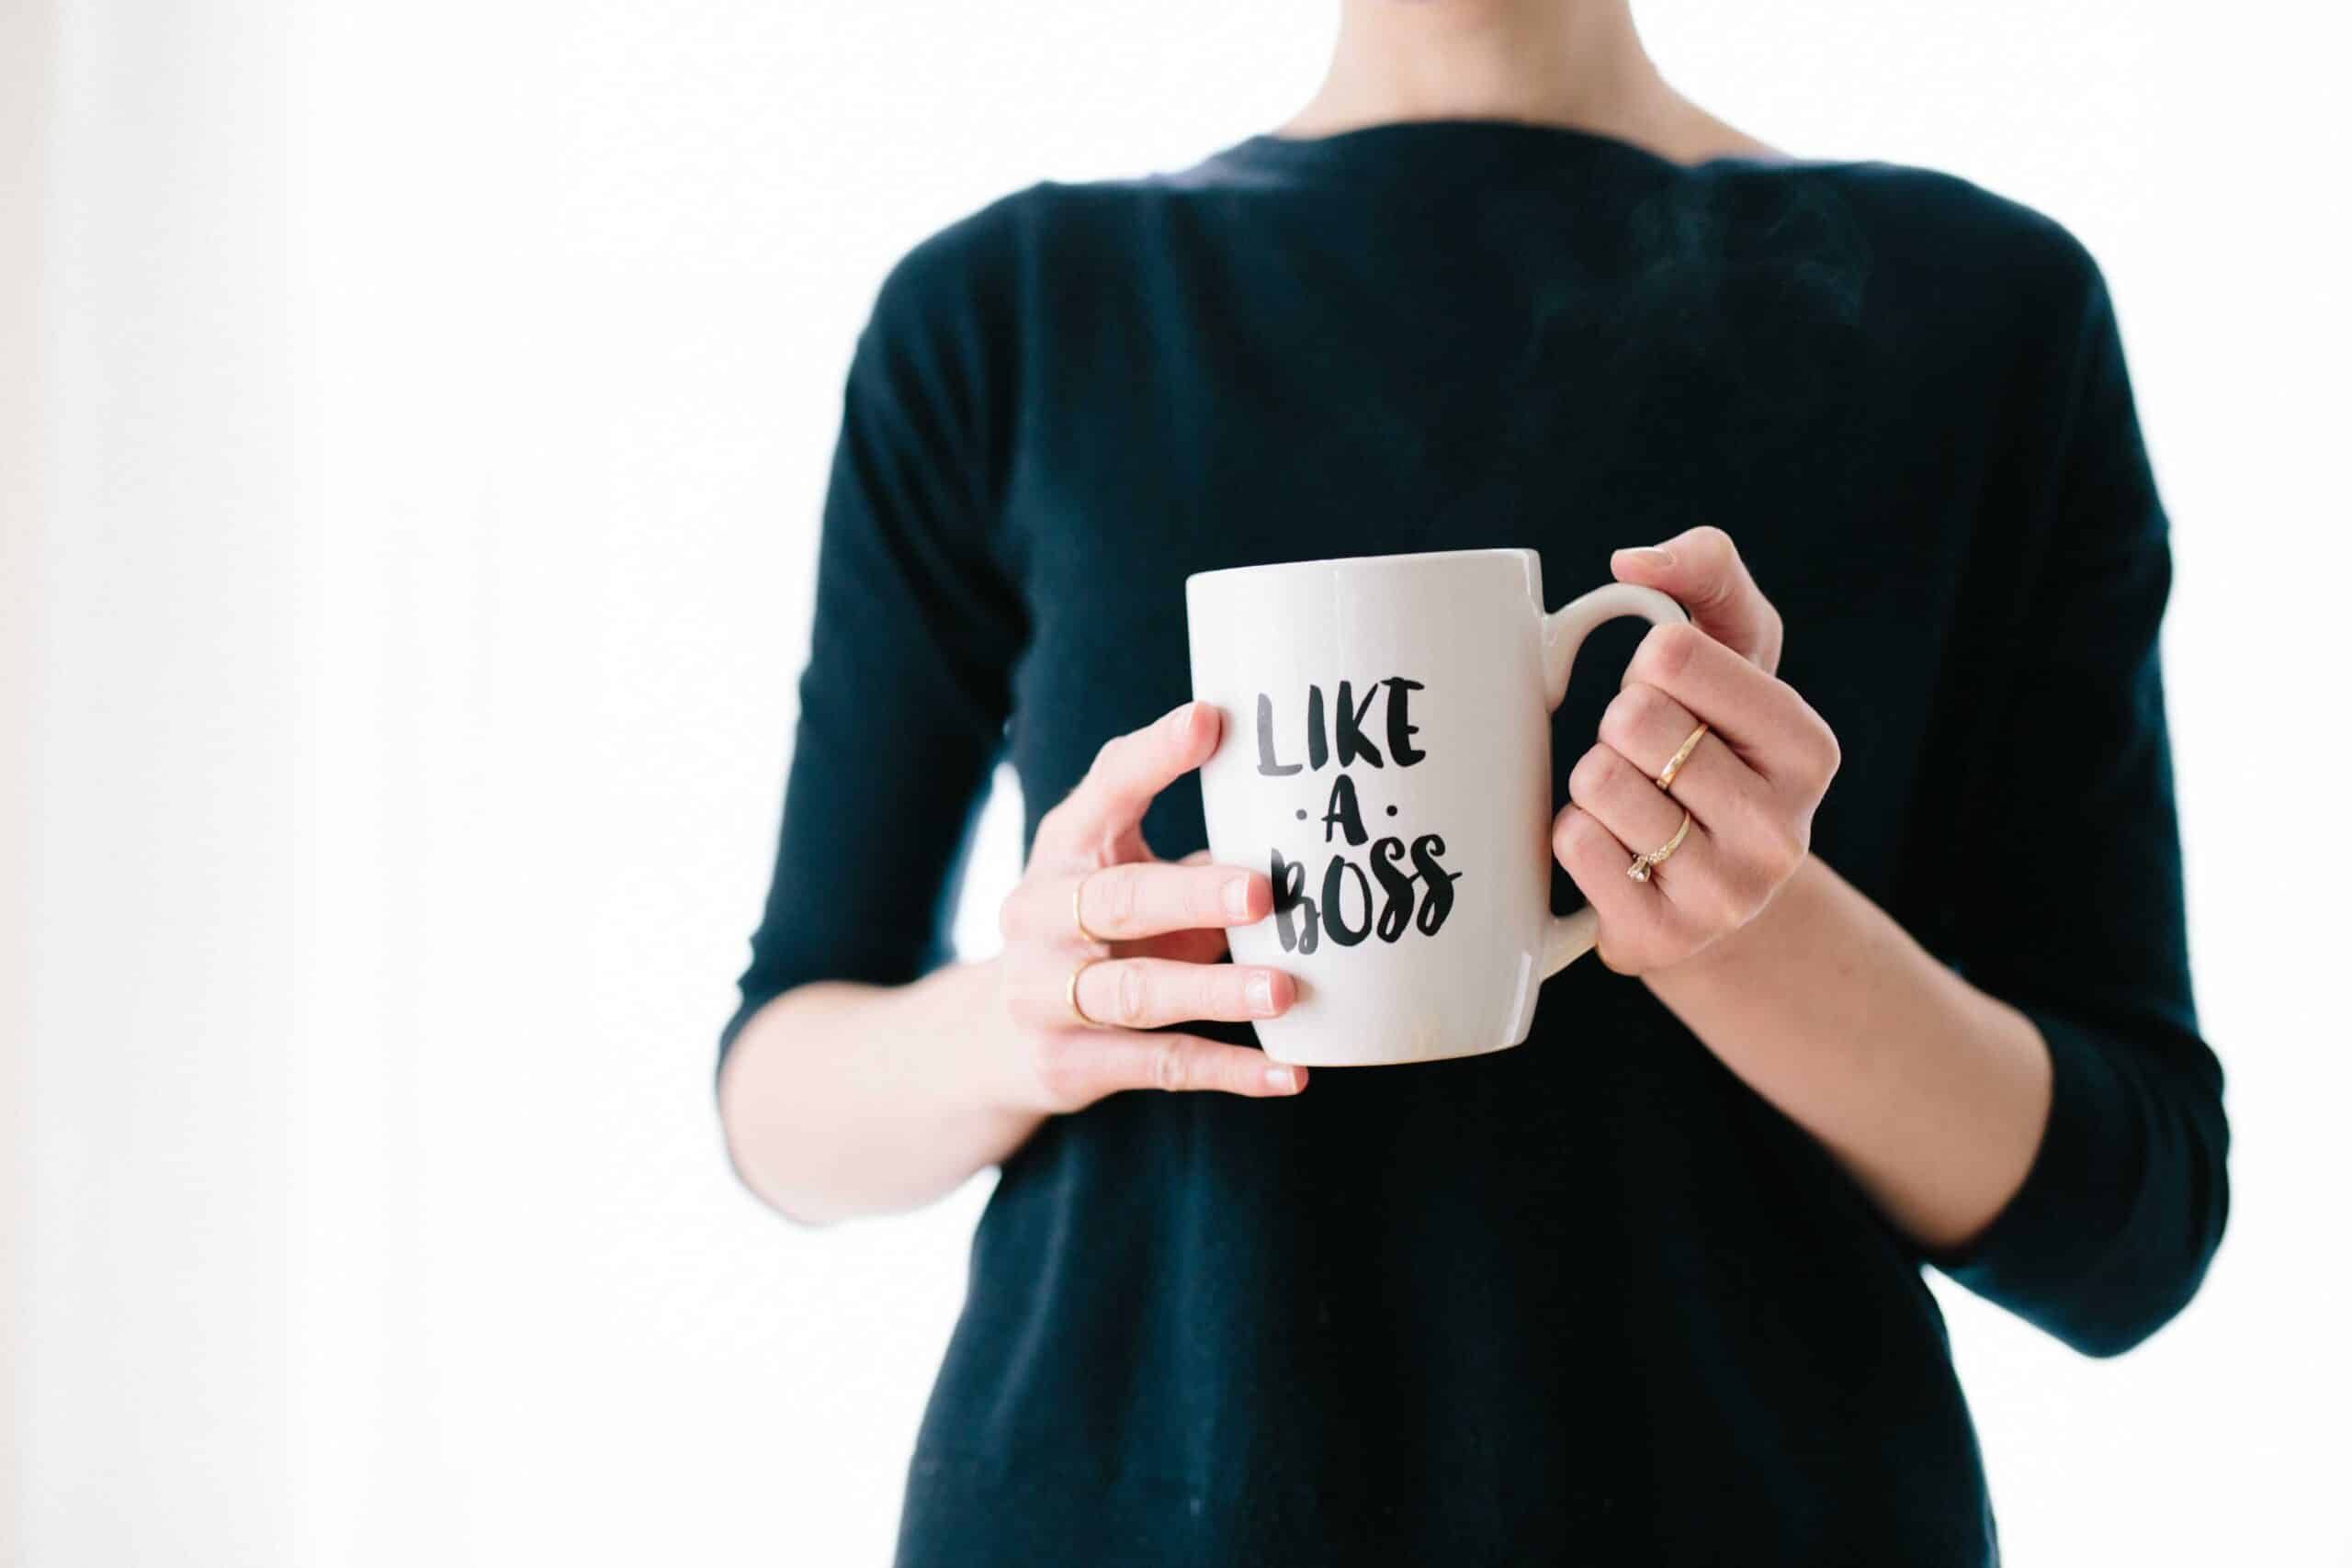 Picture of a woman holding a cup that says "like a boss". Illustrates the power of building your personal brand.